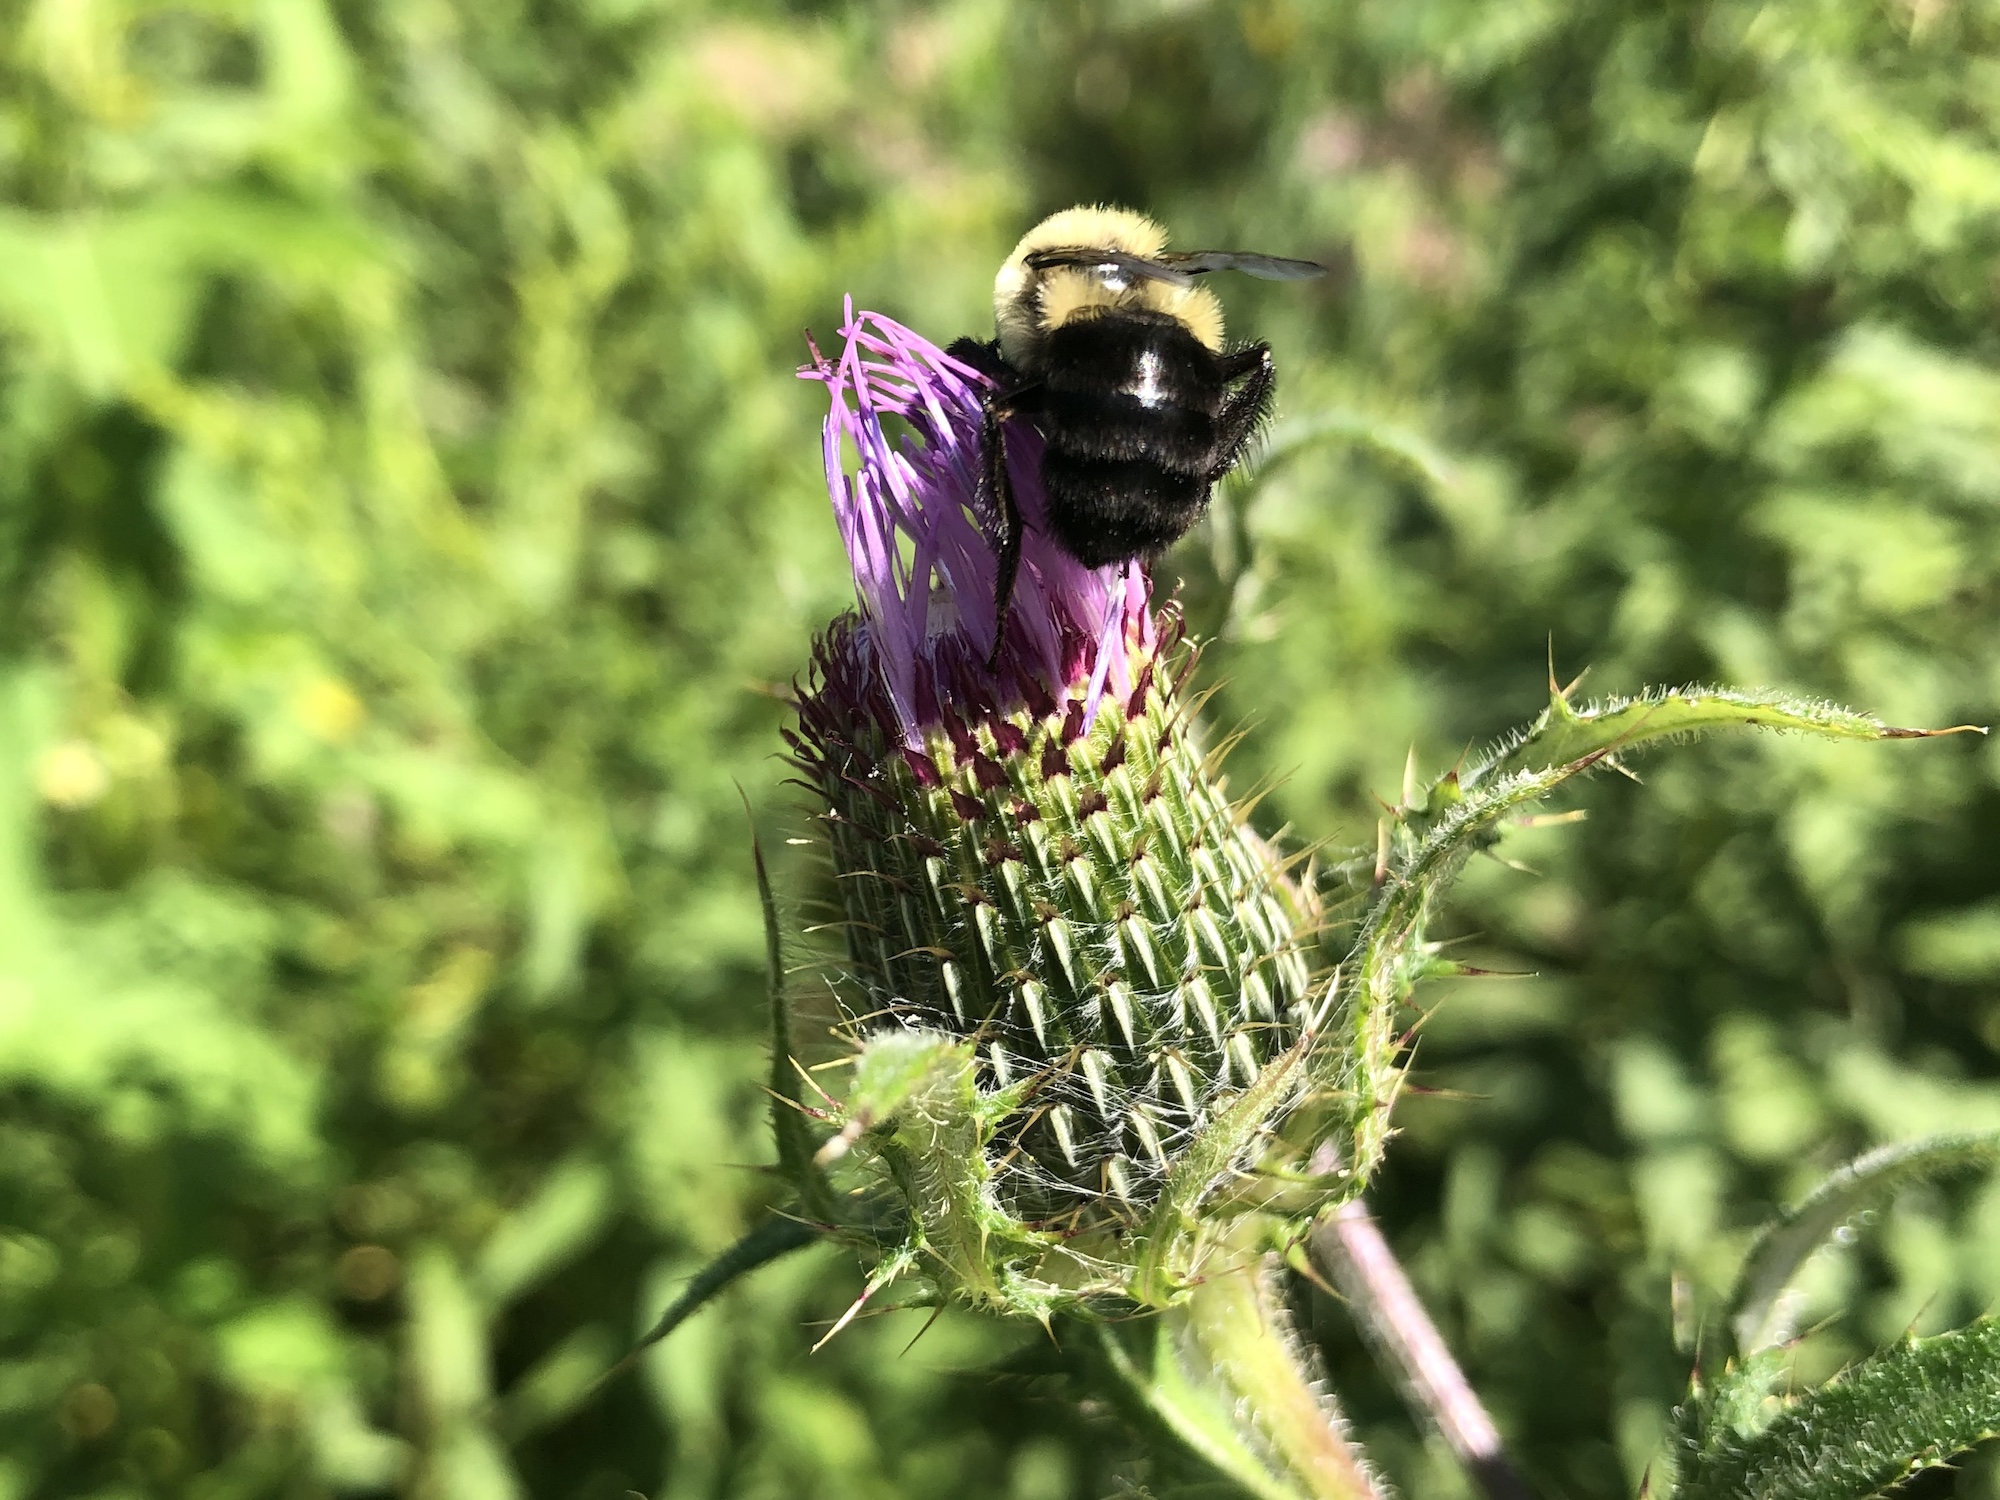 Bumblebee on Thistle on August 14, 2020.